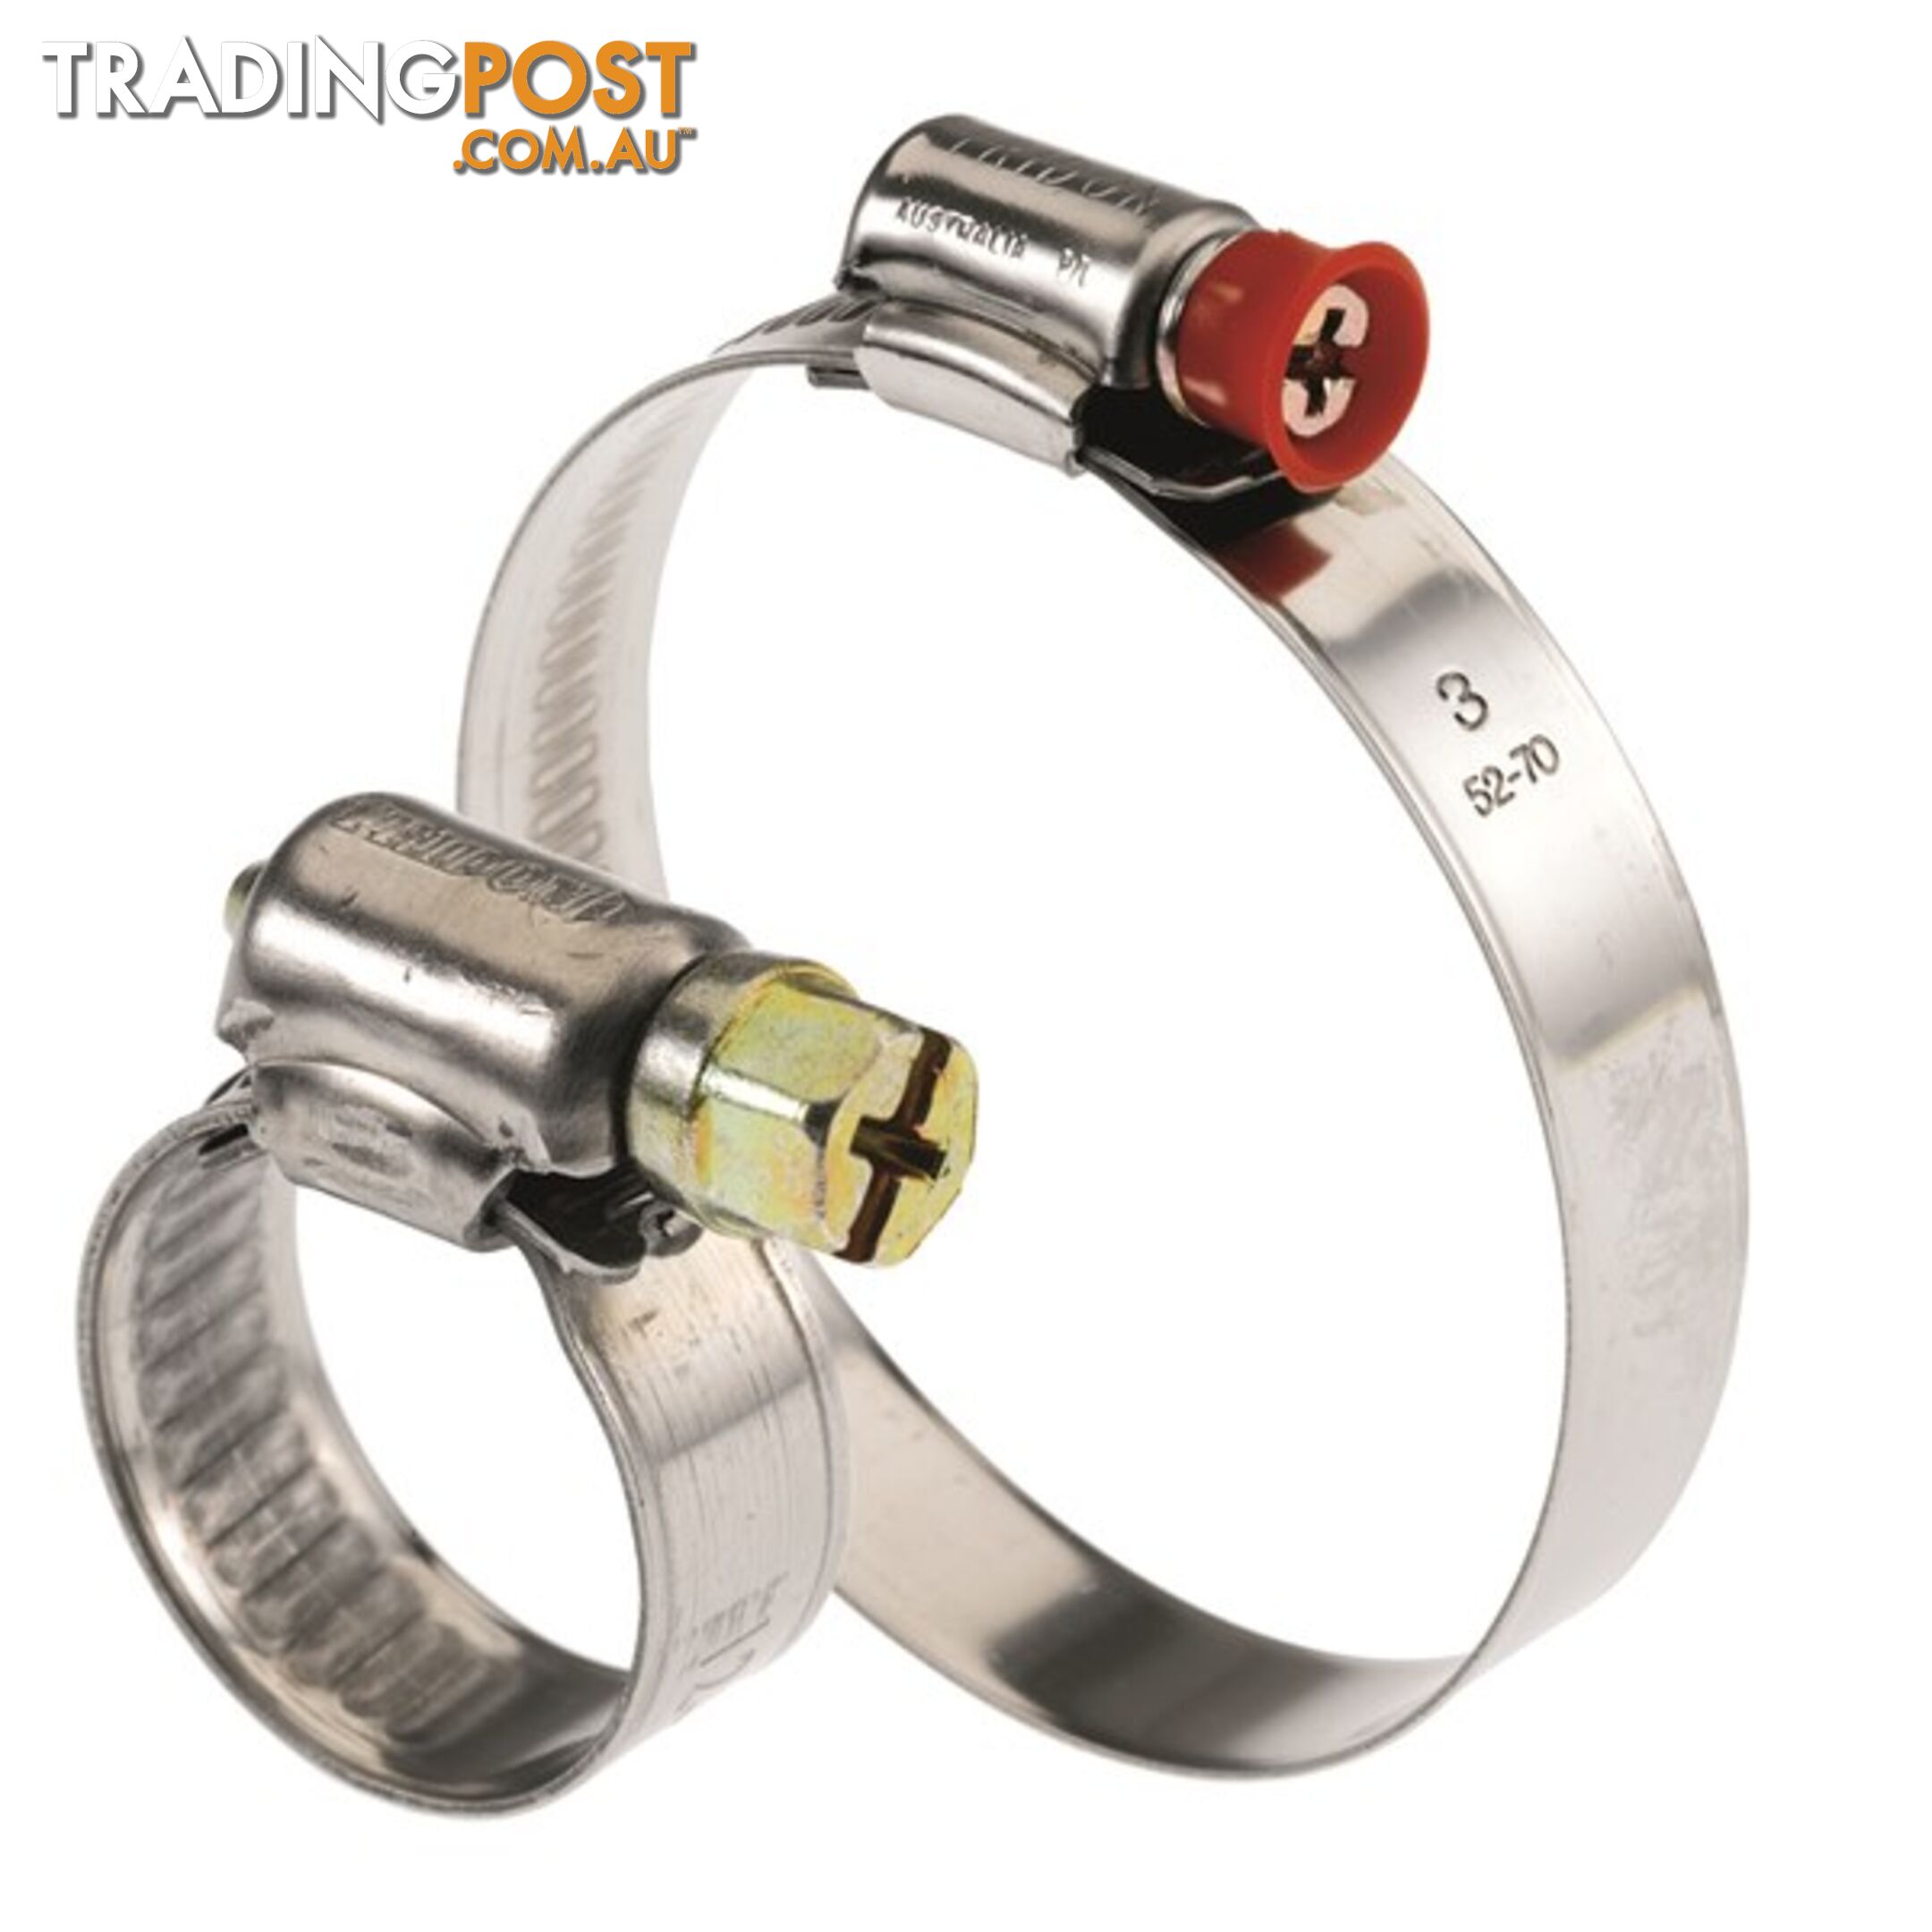 Tridon Part SS Hose Clamp 35mm-48mm Solid Band Collared 10pk SKU - MPC2AP